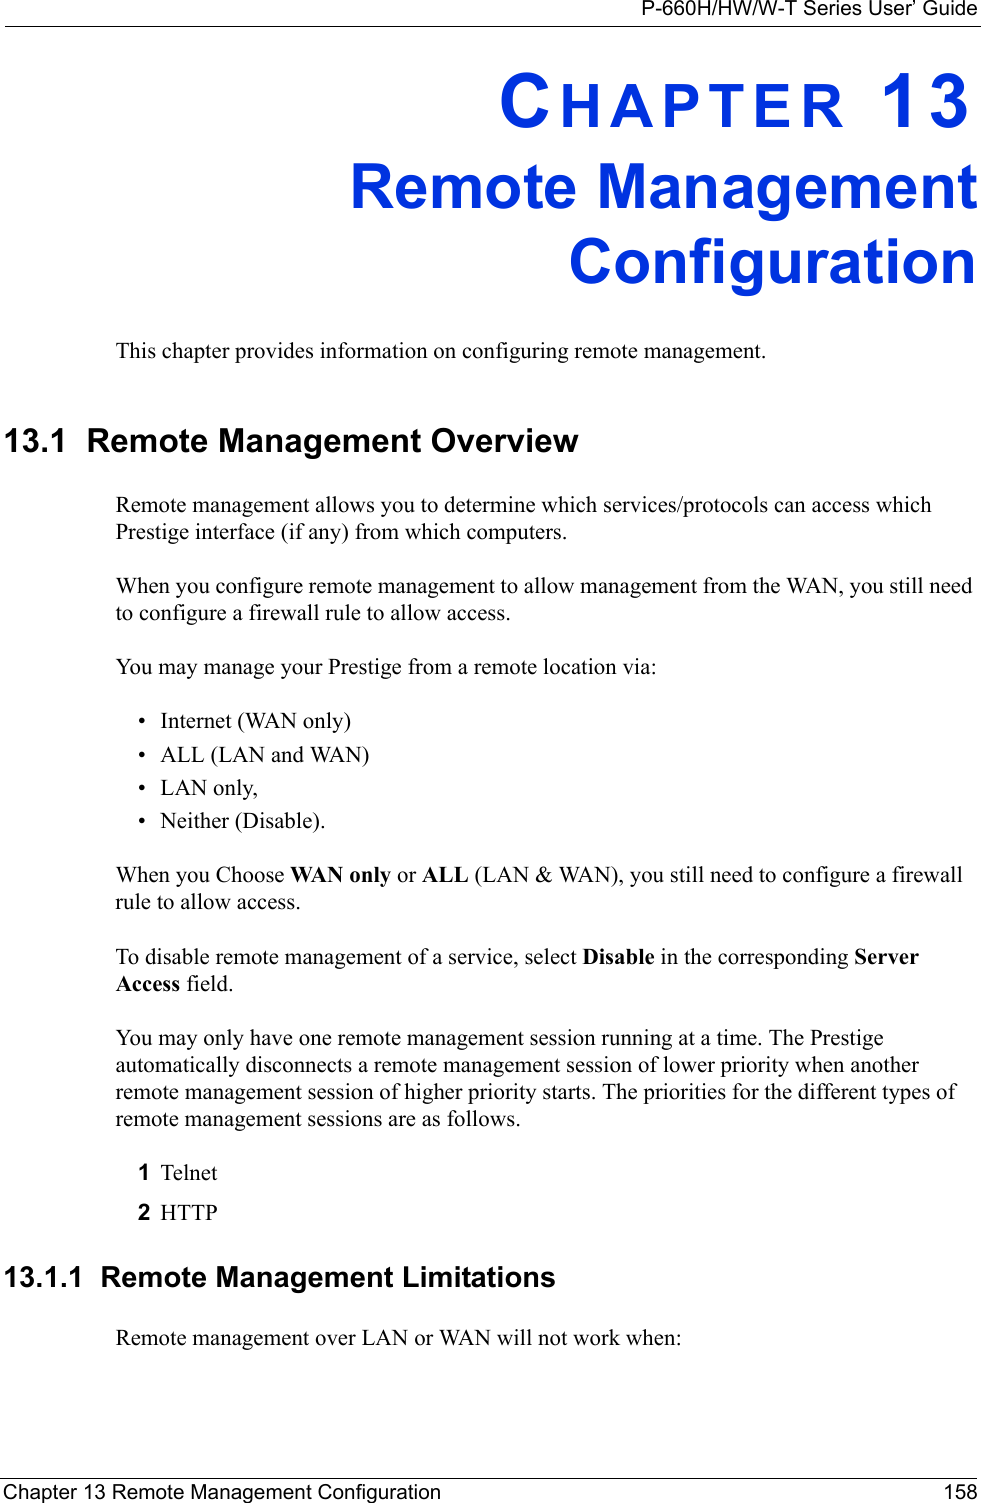 P-660H/HW/W-T Series User’ GuideChapter 13 Remote Management Configuration 158CHAPTER 13Remote ManagementConfigurationThis chapter provides information on configuring remote management.13.1  Remote Management Overview Remote management allows you to determine which services/protocols can access which Prestige interface (if any) from which computers.When you configure remote management to allow management from the WAN, you still need to configure a firewall rule to allow access.You may manage your Prestige from a remote location via:• Internet (WAN only)• ALL (LAN and WAN)• LAN only, • Neither (Disable).When you Choose WAN o n ly  or ALL (LAN &amp; WAN), you still need to configure a firewall rule to allow access.To disable remote management of a service, select Disable in the corresponding Server Access field.You may only have one remote management session running at a time. The Prestige automatically disconnects a remote management session of lower priority when another remote management session of higher priority starts. The priorities for the different types of remote management sessions are as follows.1Telnet2HTTP13.1.1  Remote Management LimitationsRemote management over LAN or WAN will not work when: